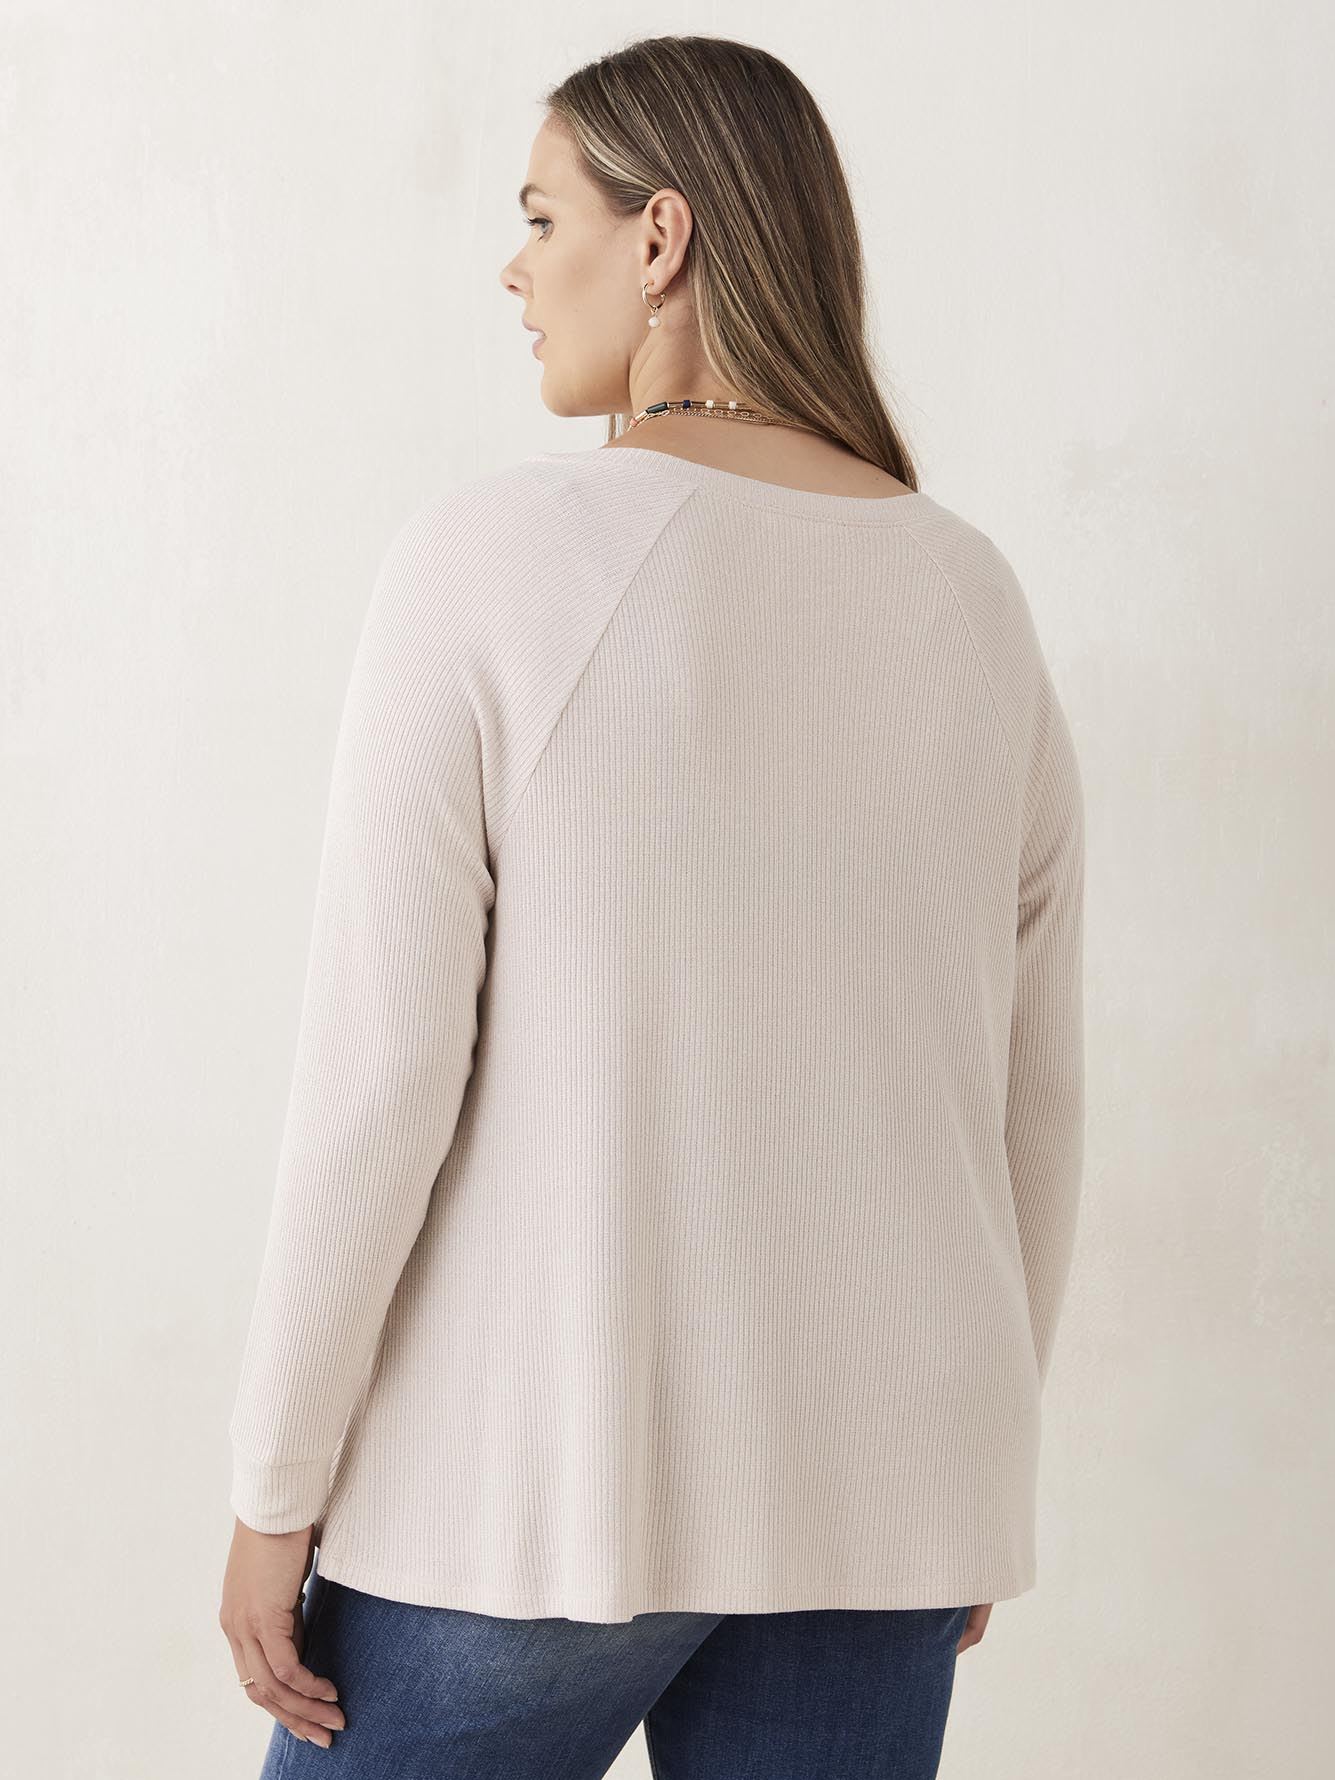 Long Sleeve Rib Knit Top - In Every Story | Penningtons